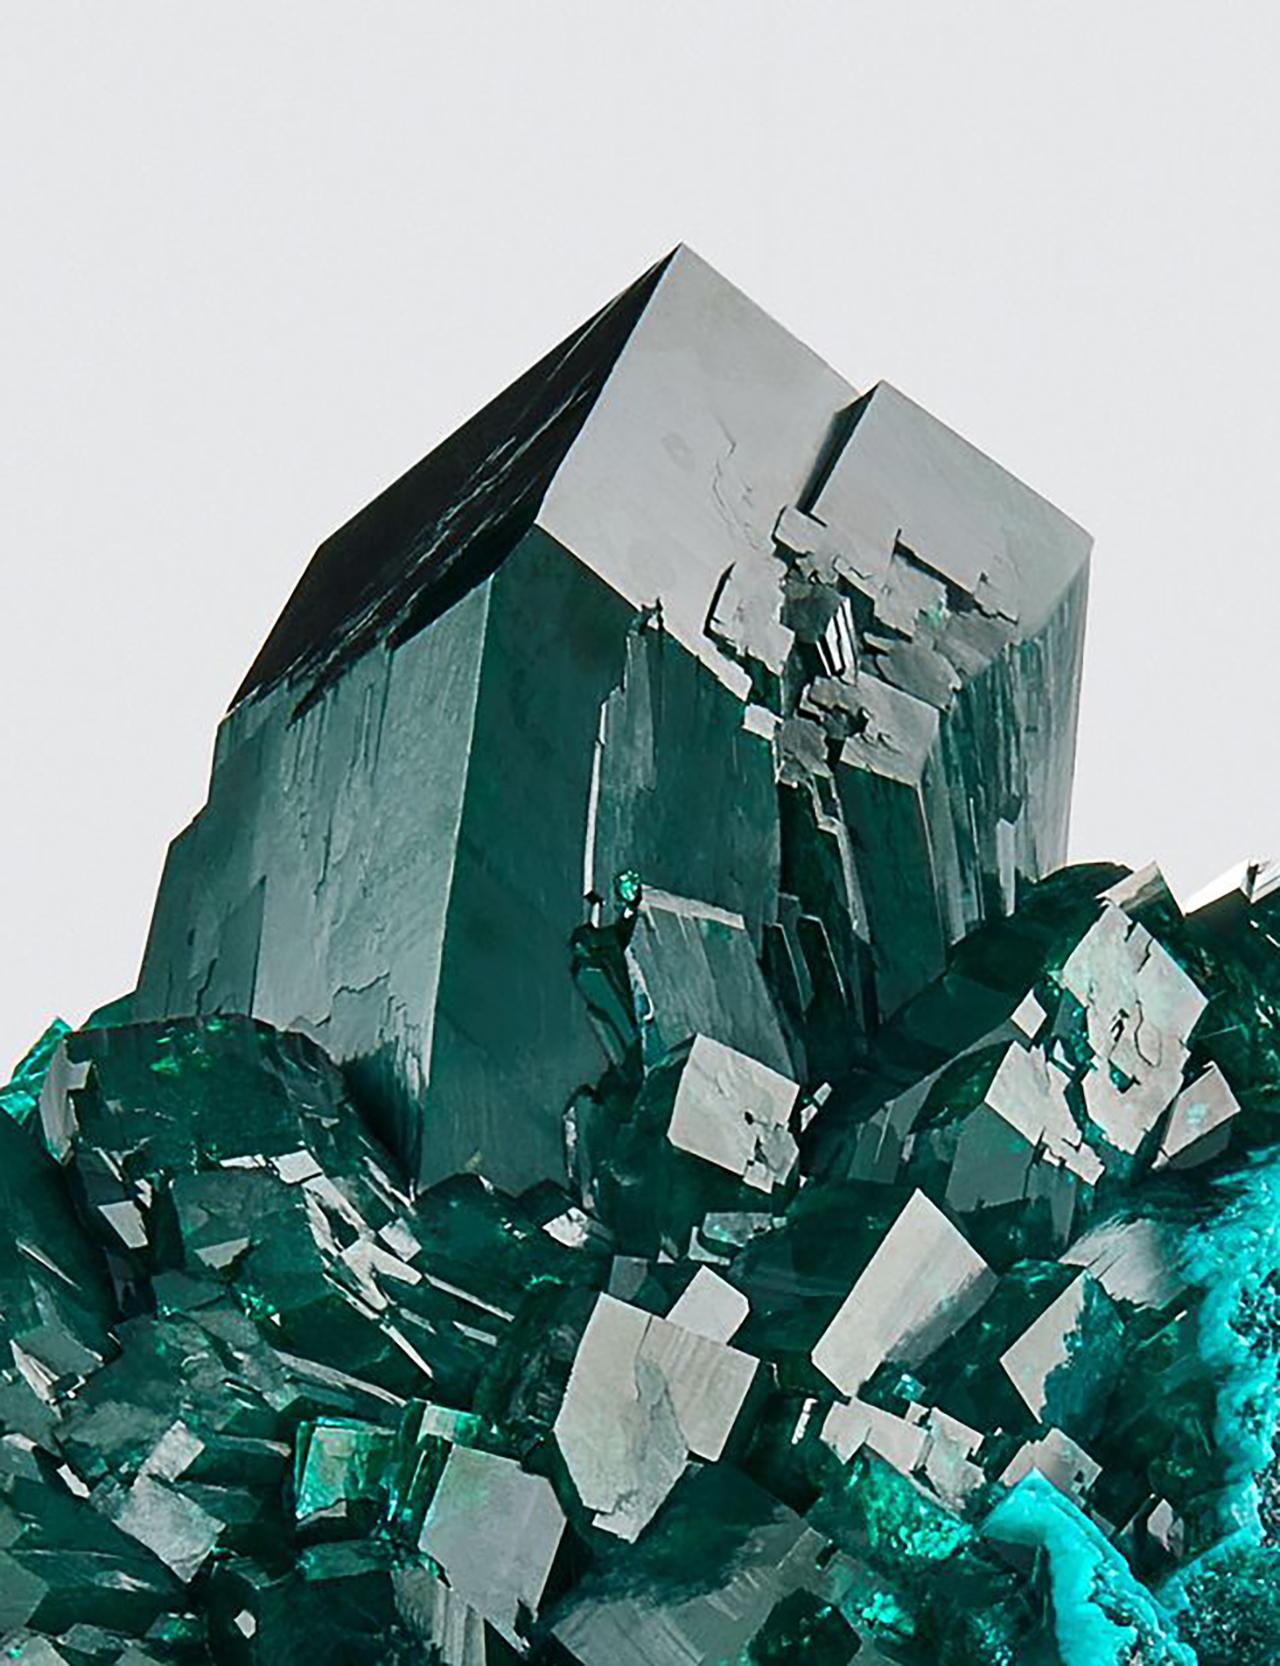 Dioptase, Omaue Mine, Kaokoveld Plateau, Kunene region, Namibia
Measures: 8.5 cm tall x 7 cm wide

Dioptase, once believed to be emerald when first encountered, is amongst the most vividly colored species. Large gem crystals, such as these, are